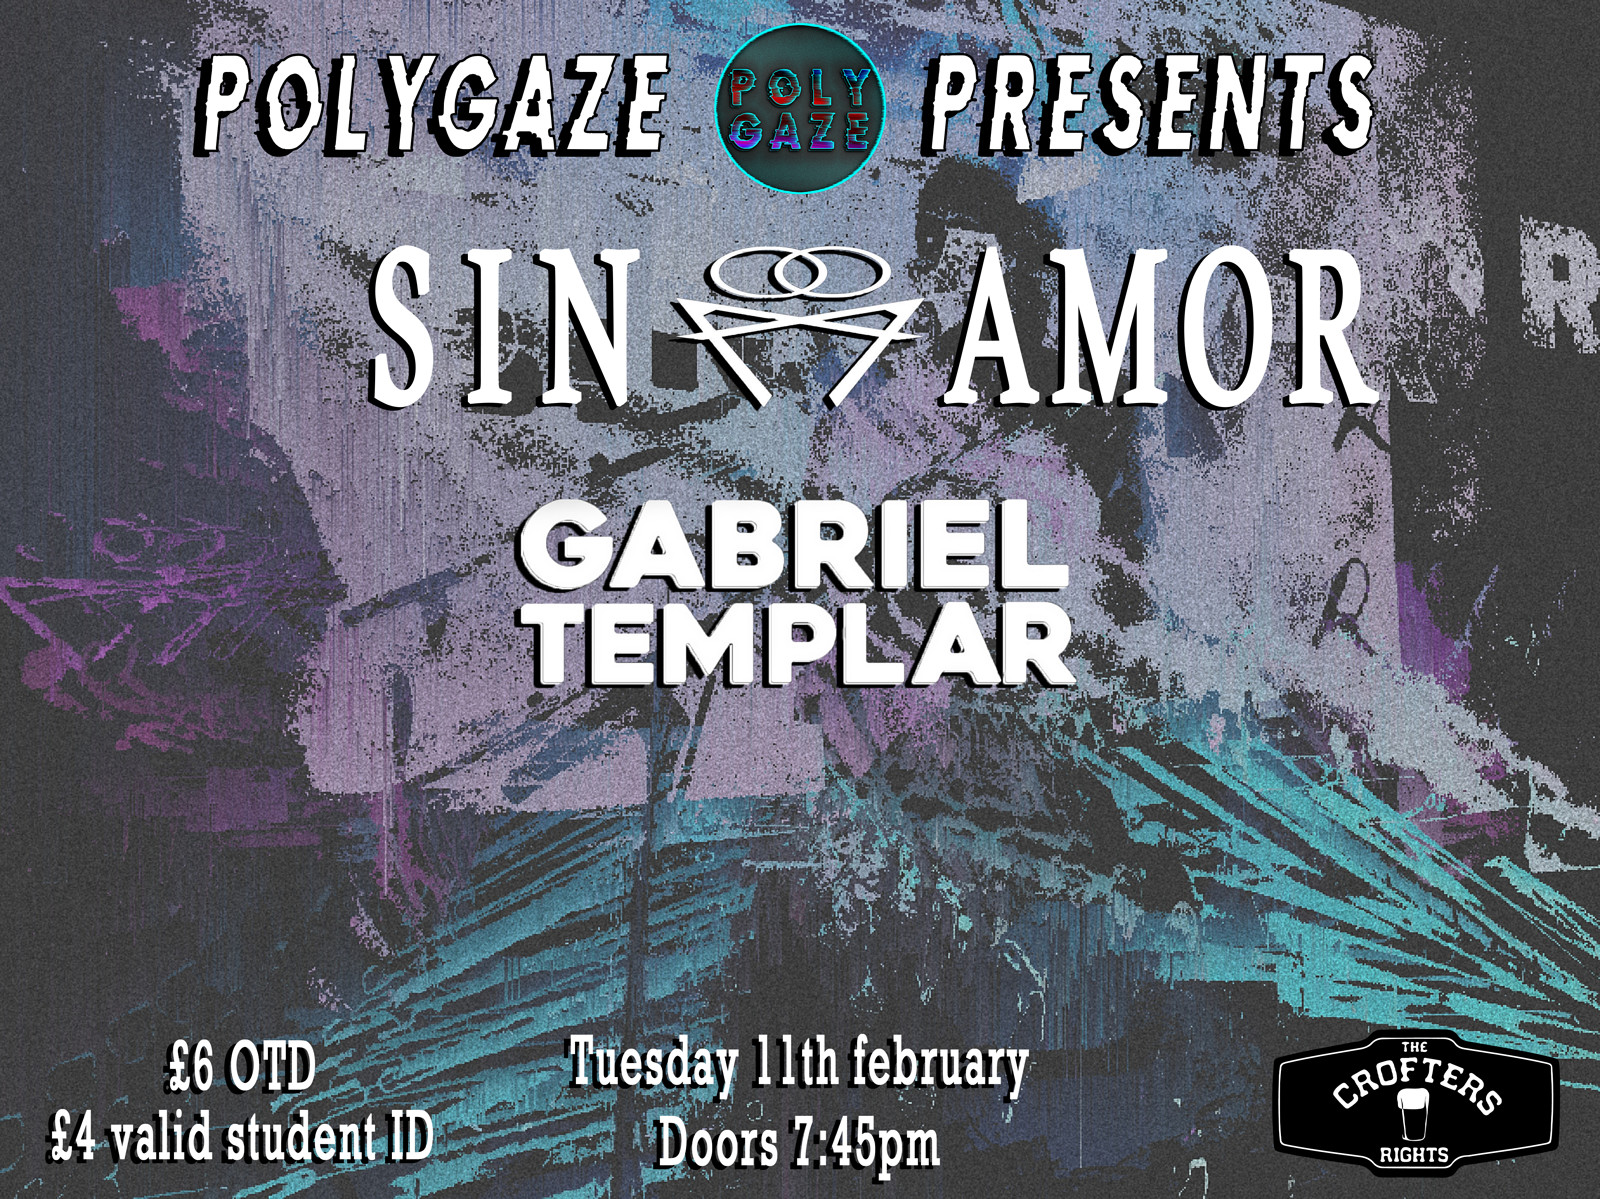 POLYGAZE Presents SIN AMOR 11th February at Crofters Rights